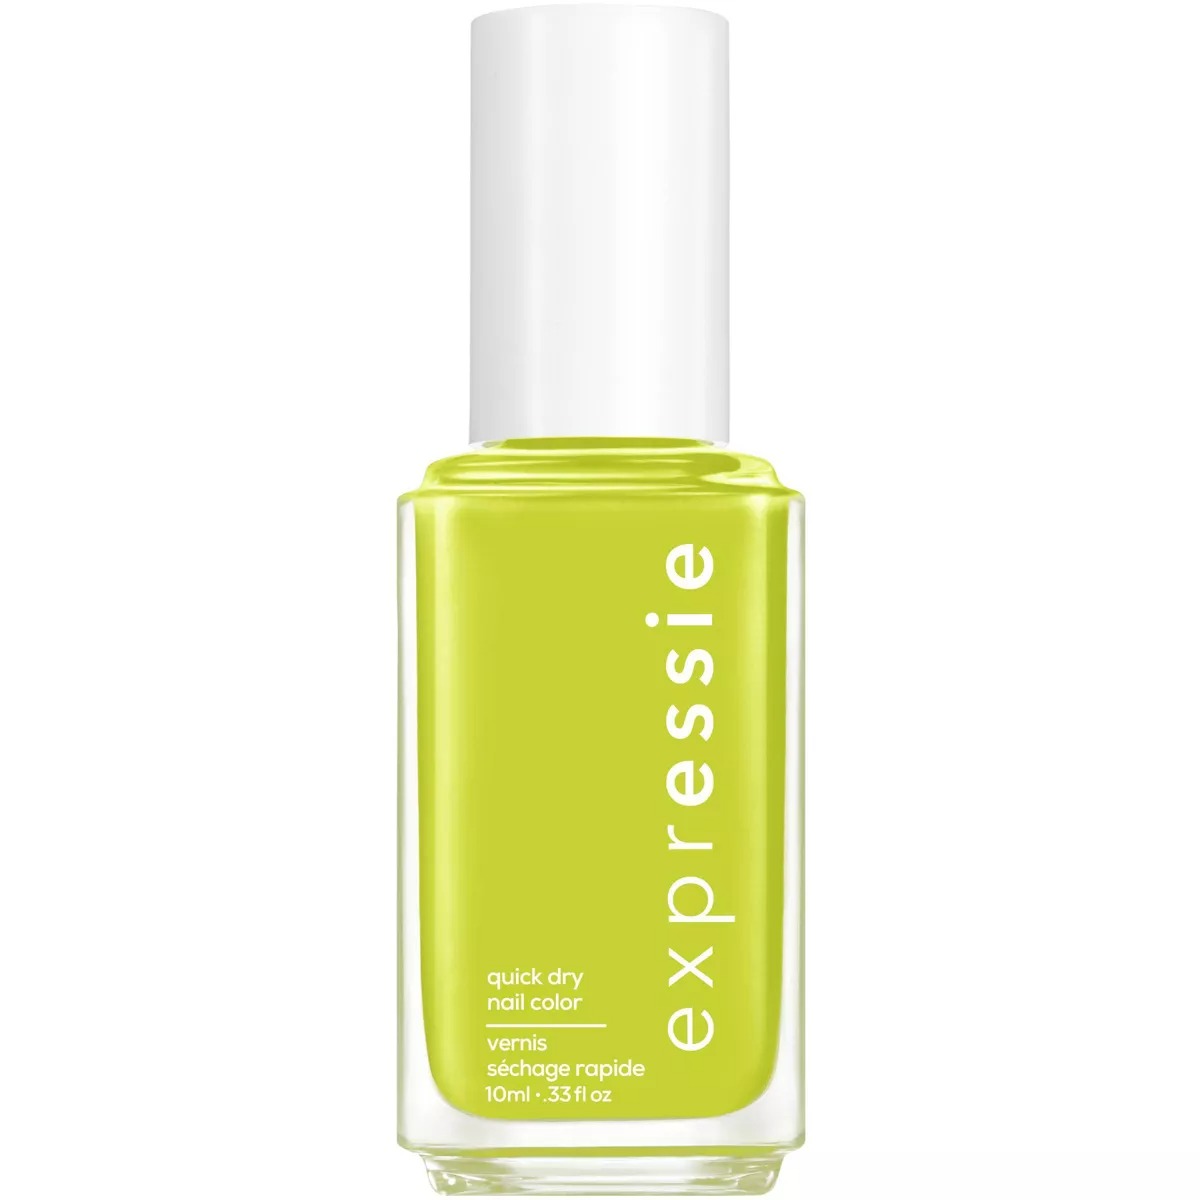 Essie Expressie Nail Polish in Main Character Moment